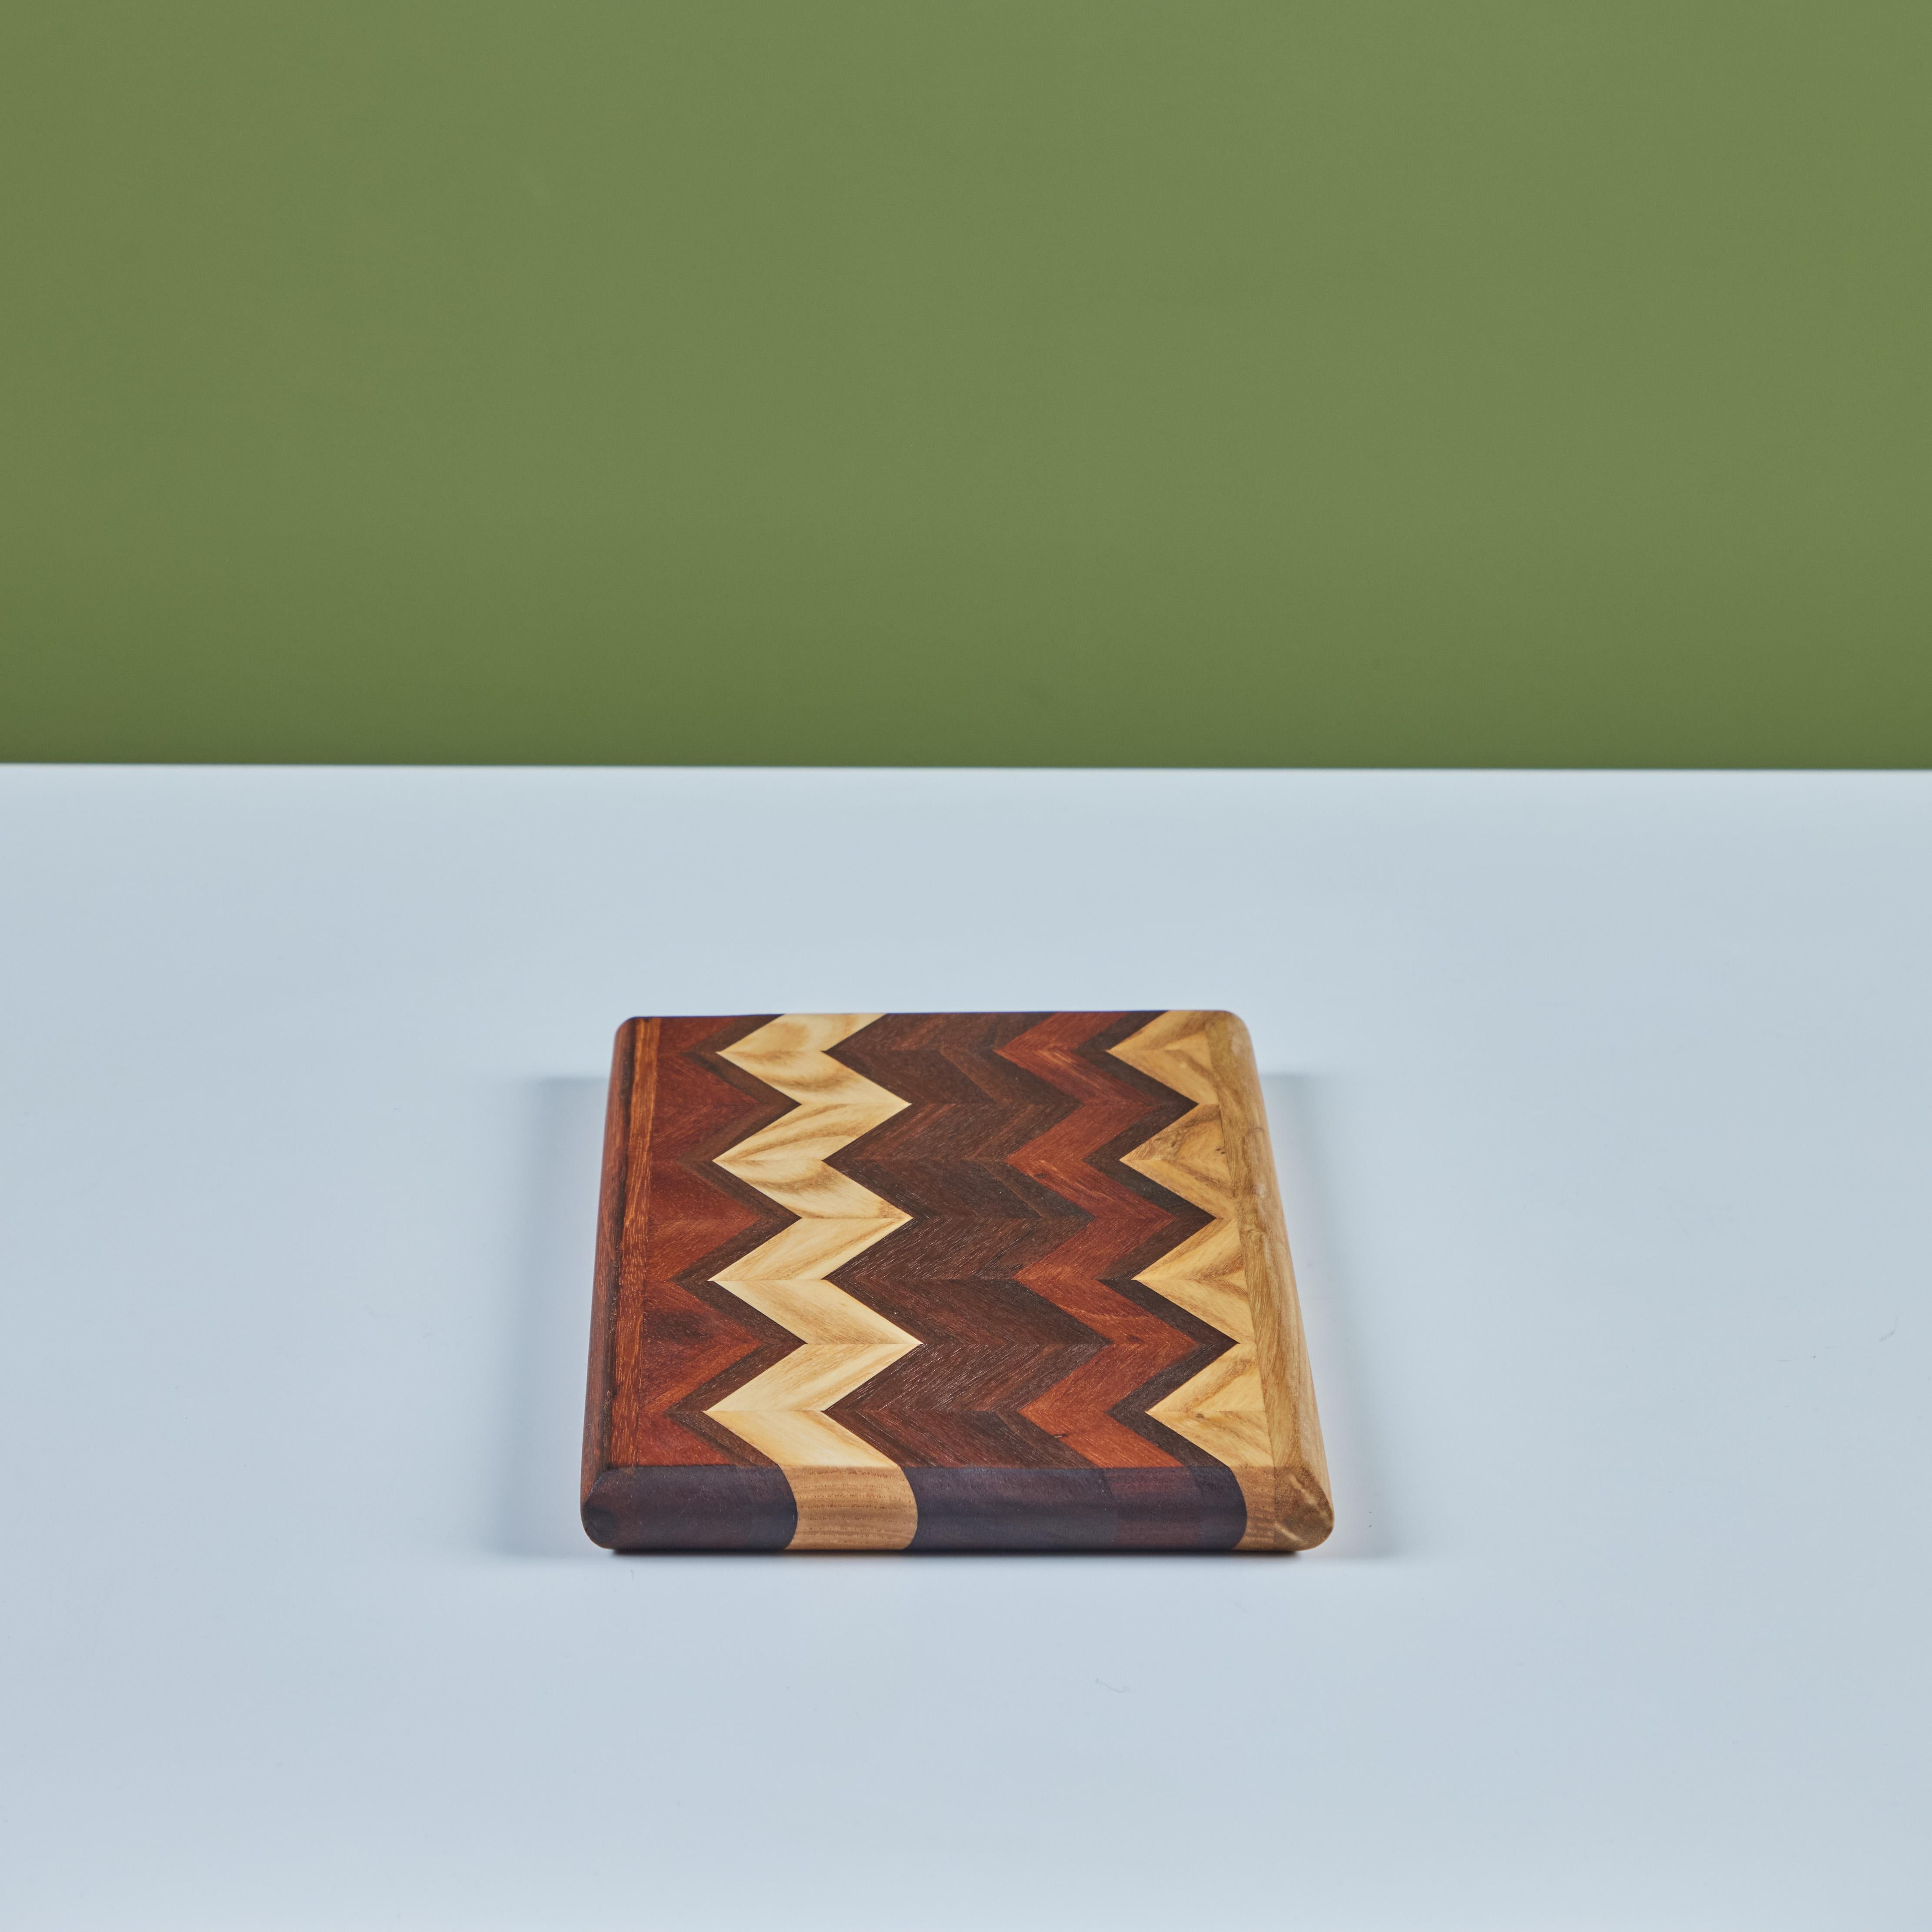 20th Century Don Shoemaker Wood Inlaid Chevron Pattern Cutting Board for Señal For Sale